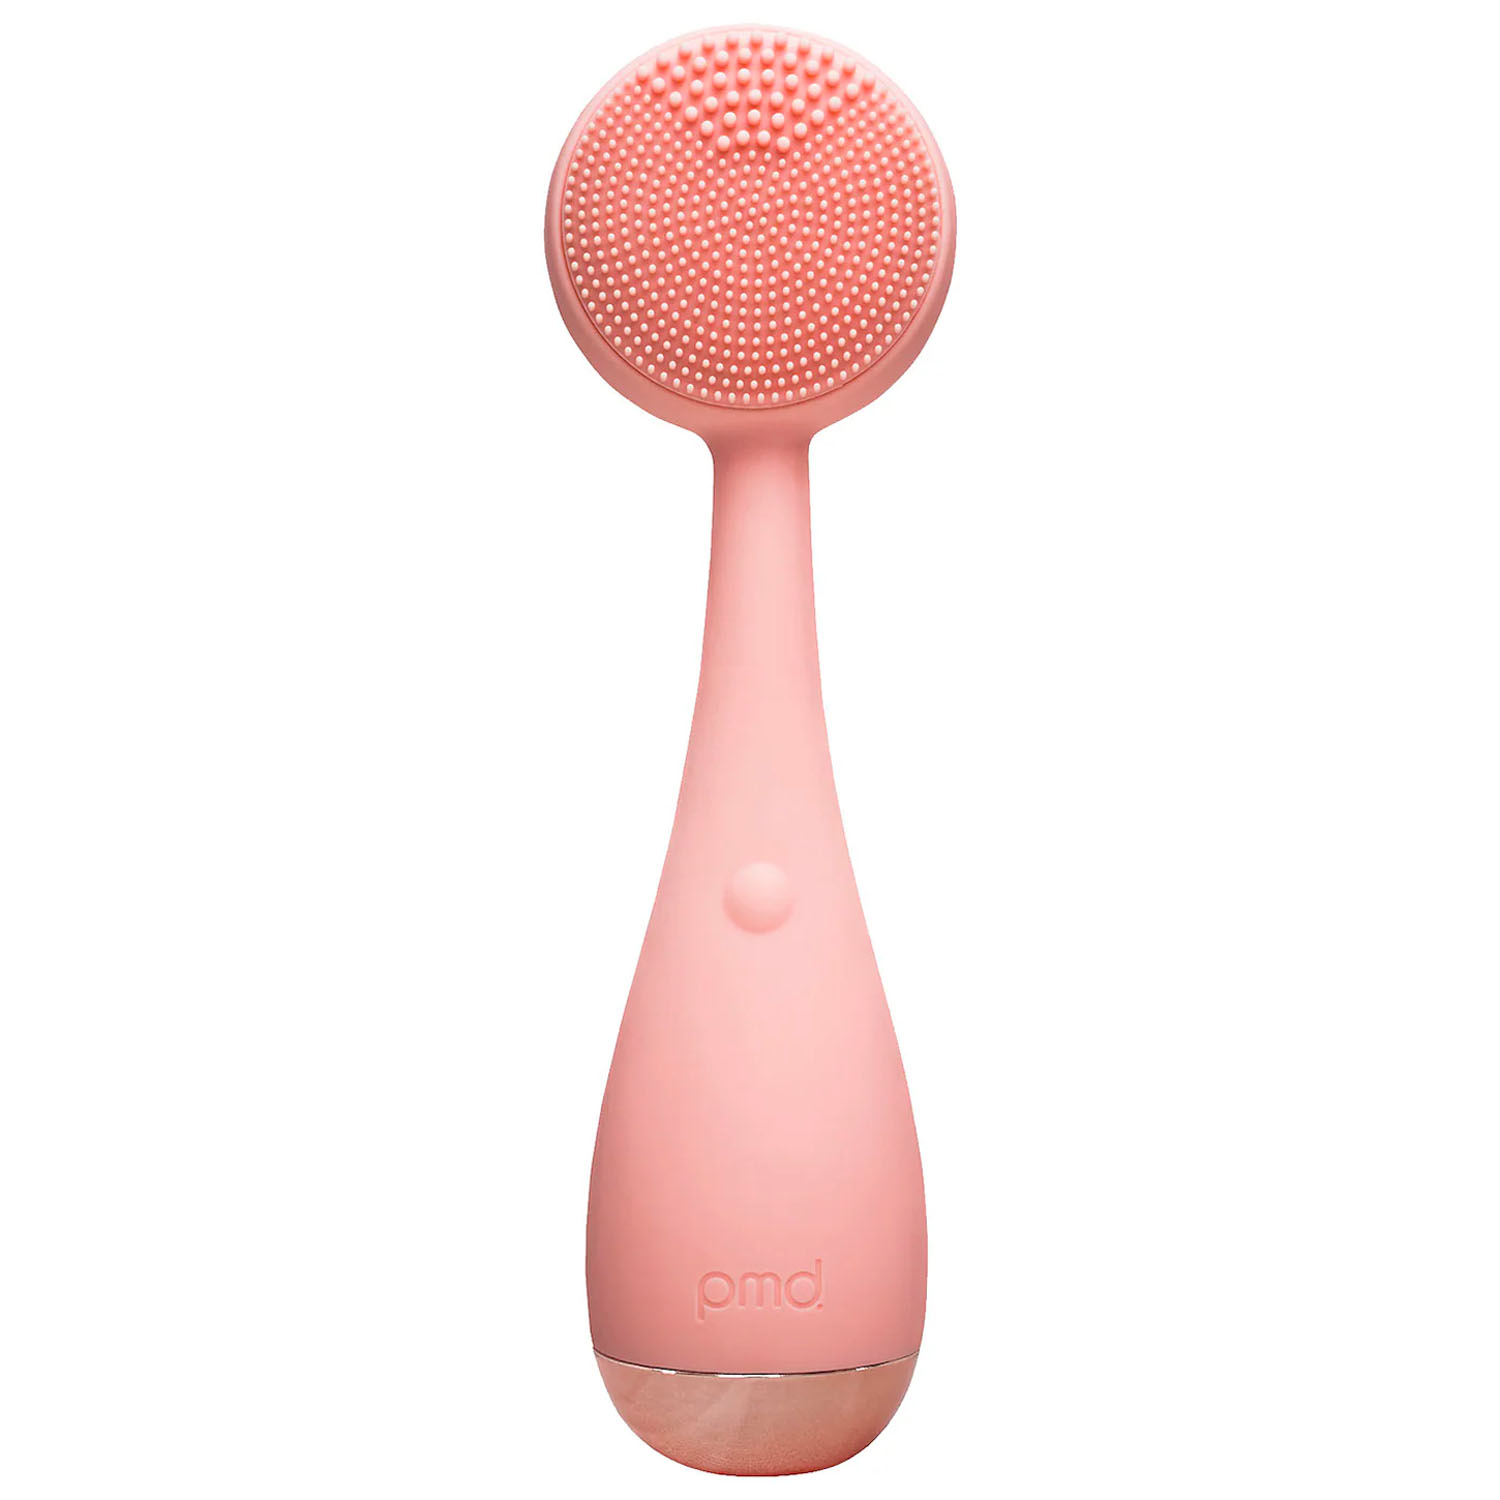 pmd smart cleansing brush